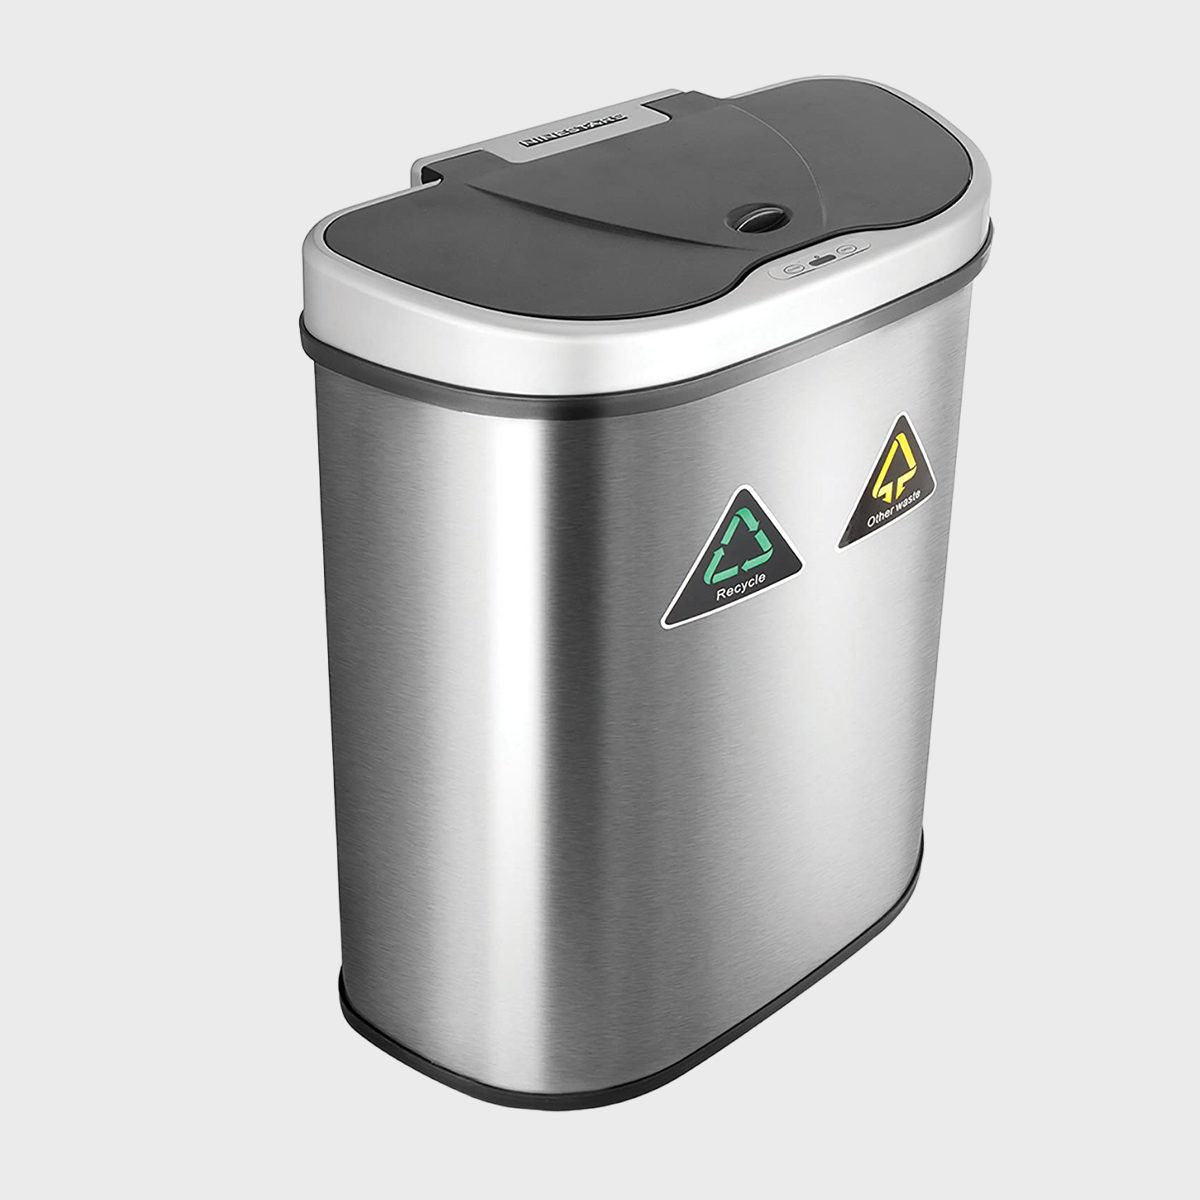 https://www.rd.com/wp-content/uploads/2023/05/Ninestars-Automatic-Touchless-Trash-Can-and-Recycler_ecomm_via-amazon.com_.jpg?fit=700%2C700